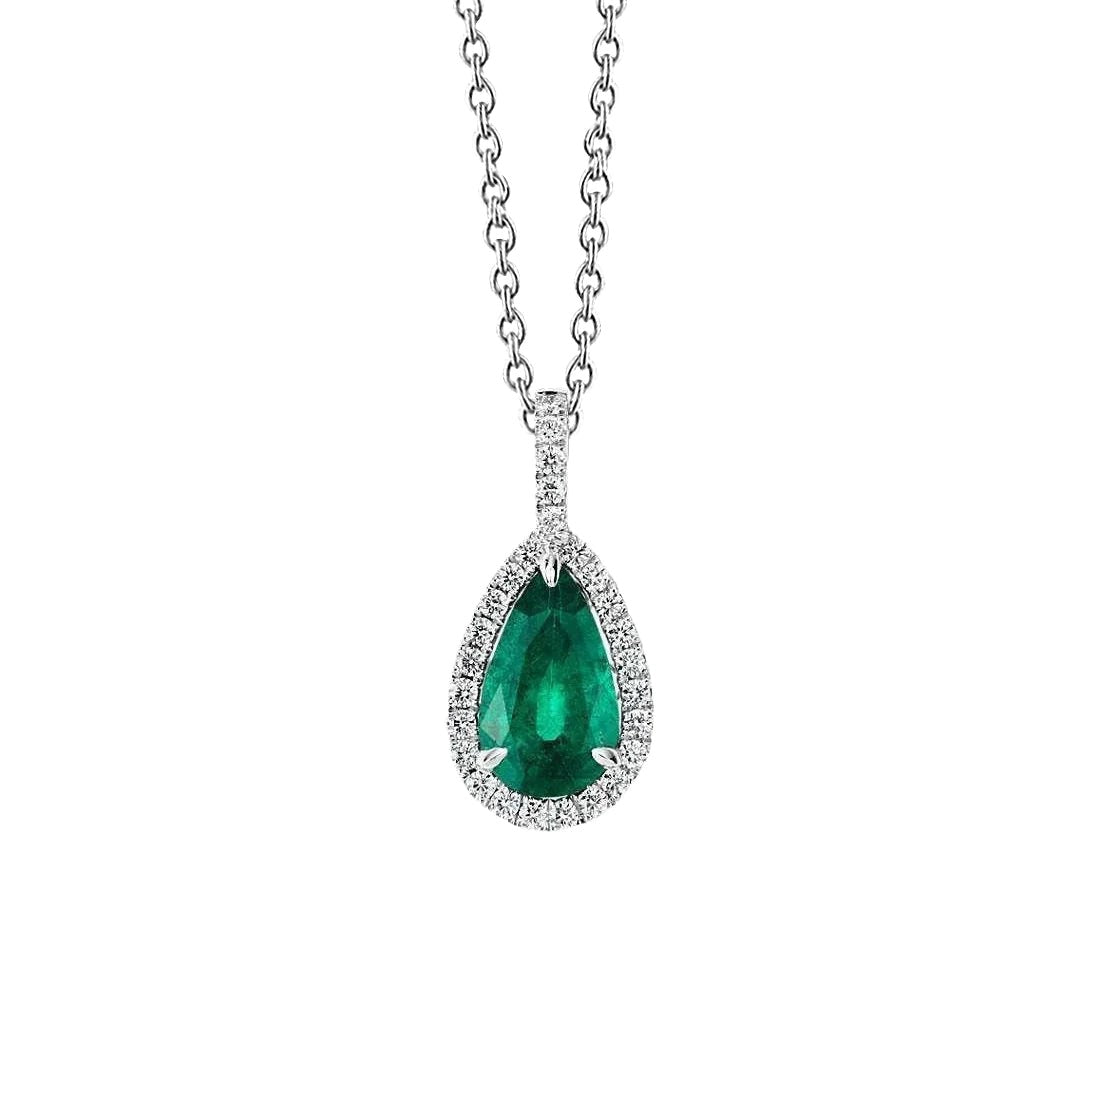 Colombian Green Emerald And Diamond Gemstone Pendant With Chain 8.25 Carats